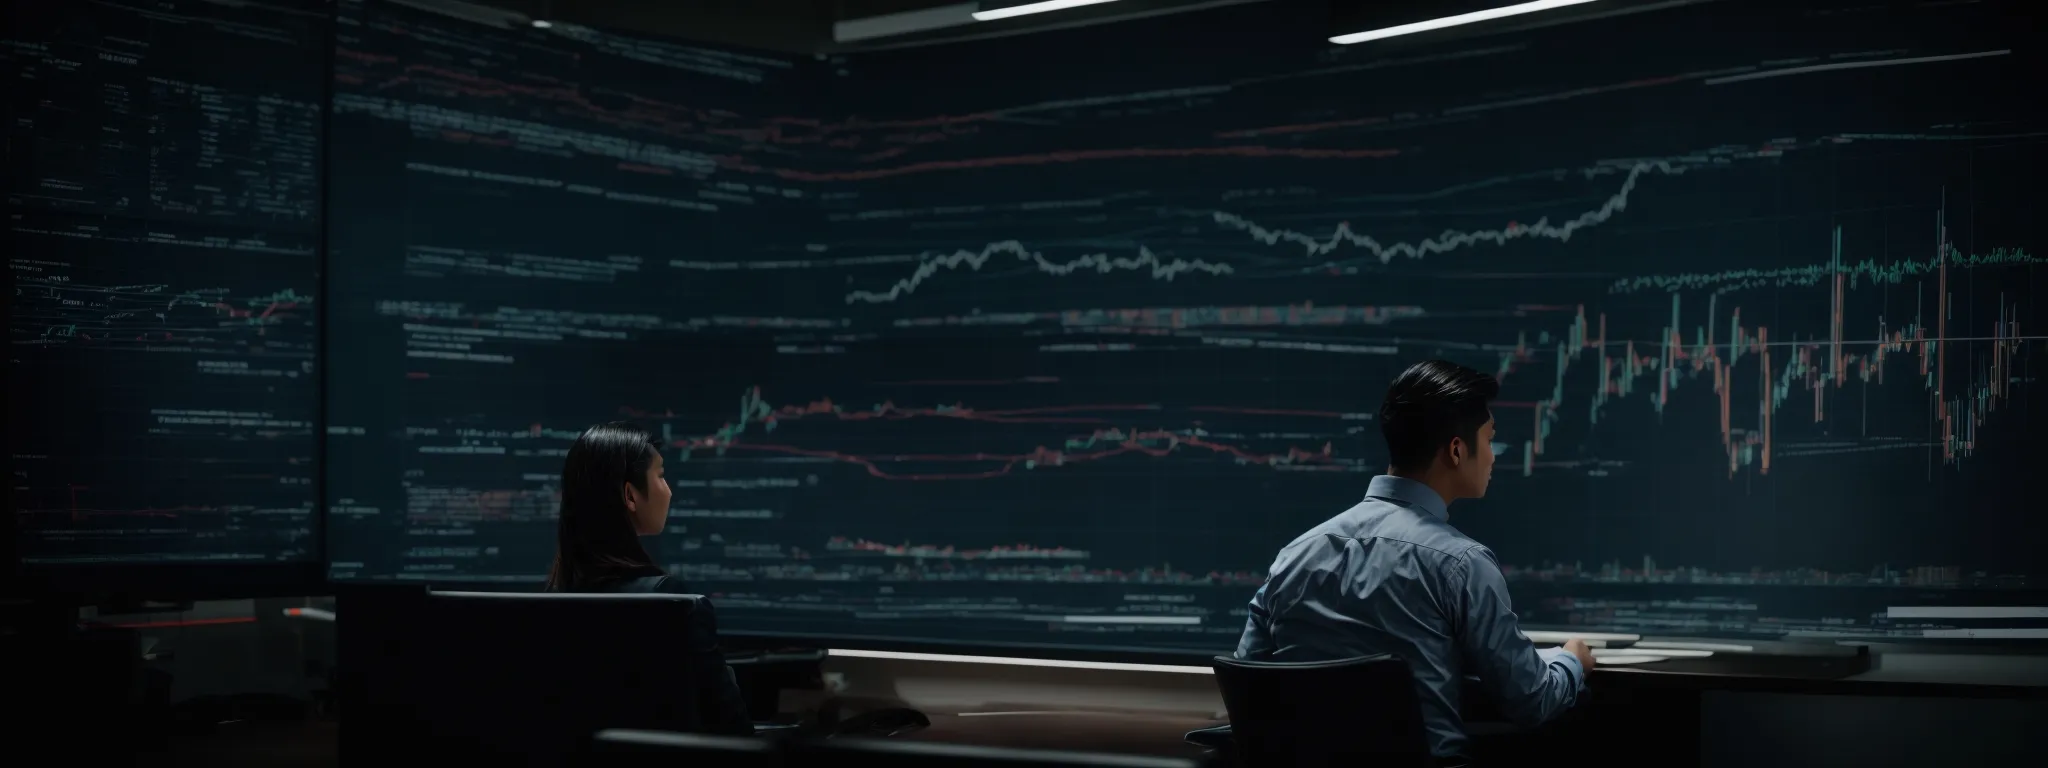 a business person analyzing a large screen filled with graphs and analytical data.